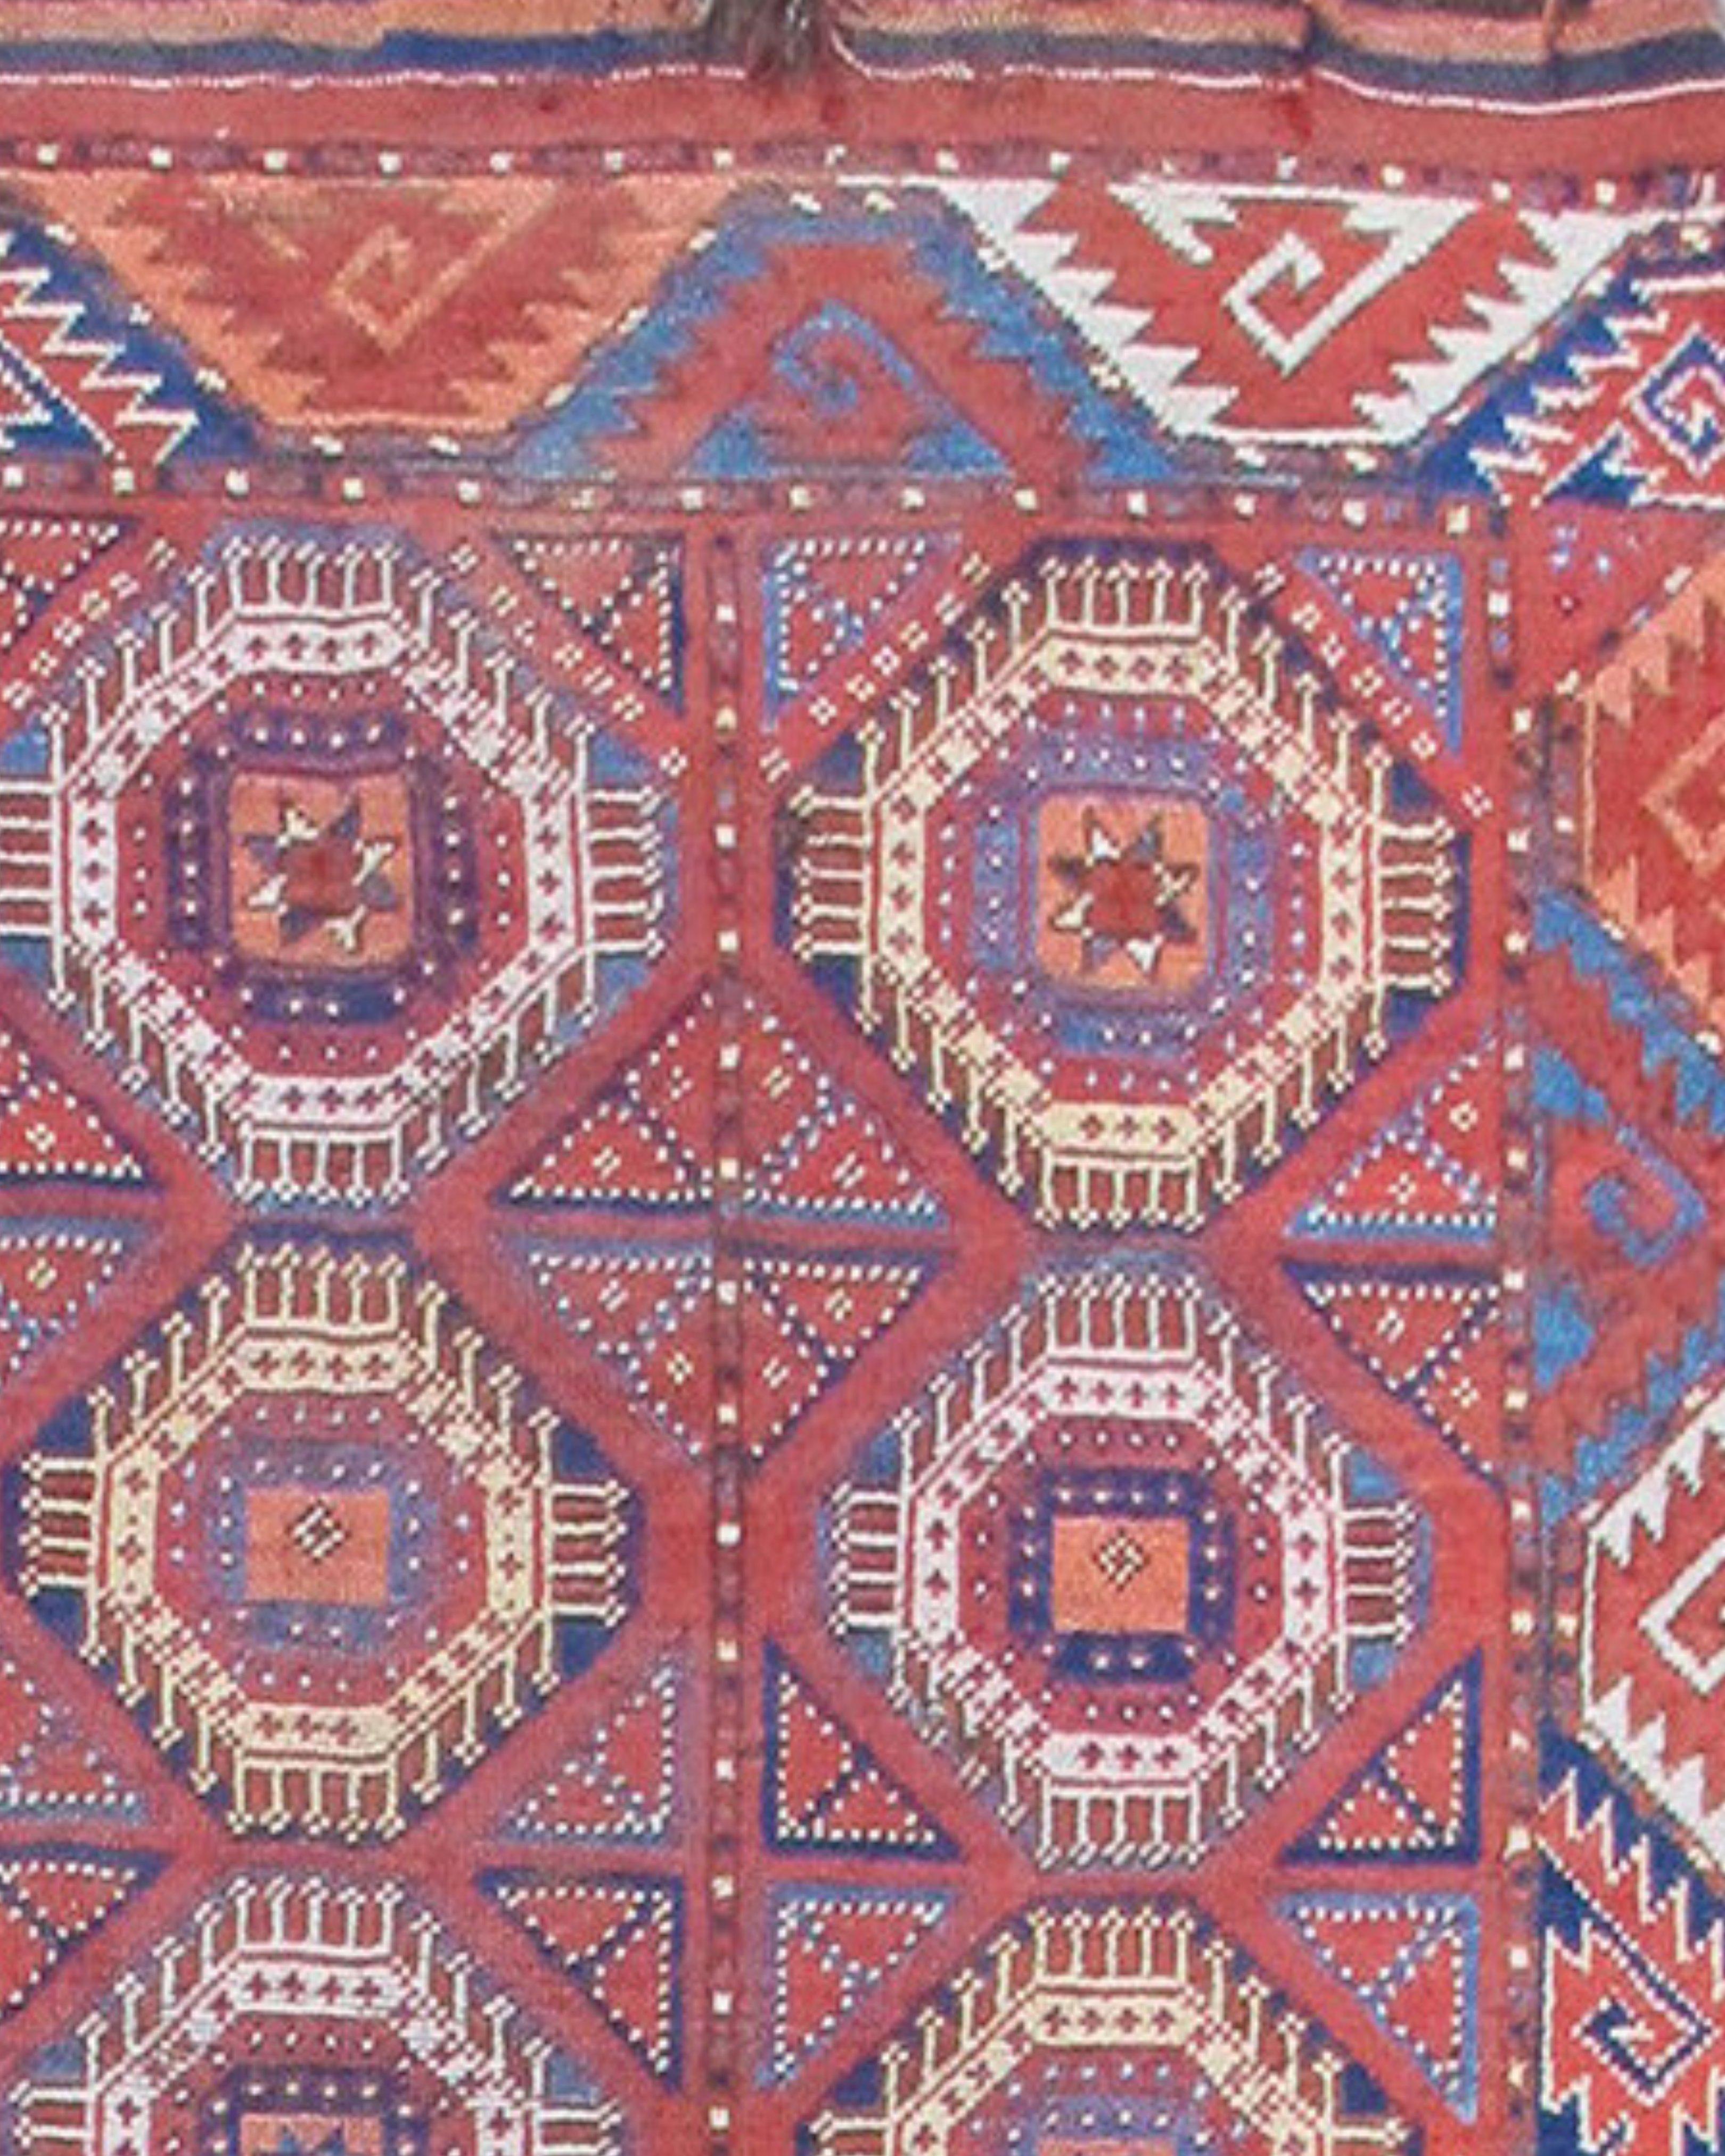 Red Bashir Ersari Long Rug with Tiled Octagons, 19th Century

Woven along the banks of the Oxus River in Central Asia, this long and narrow Bashir carpet represents a distinctive form of Turkmen weaving. The town Bashir is located in what is now